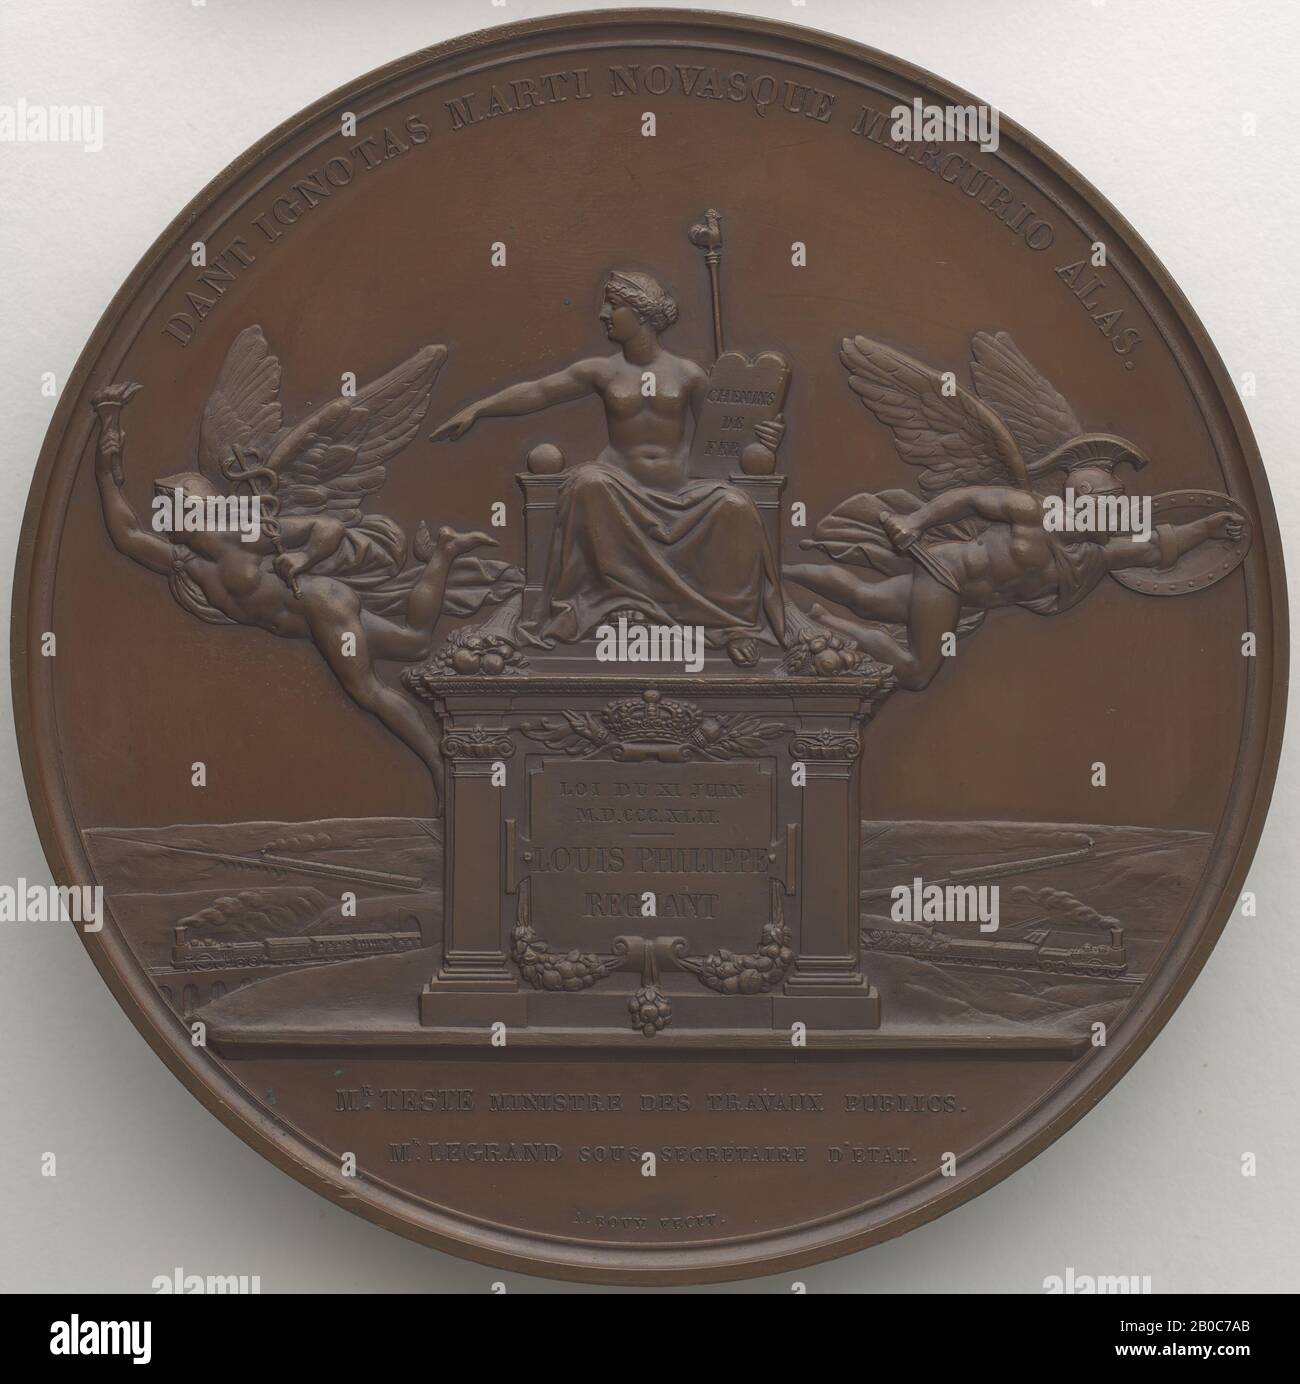 Antoine Bovy, Louis Phillipe I (1773-1850), King of France 1830-1848, 1842, copper, 4 7/16 in. (11.3 cm.), This medal, depicting King Louis Philippe I, commemorates the 1842 establishment of the French Railway System. The neoclassical rendition of Louis Philippe I's portrait on this medal strictly follows the precedent set by Napoleon I, who oftentimes depicted himself in a style reminiscent of the Caesars. The personification of France on the reverse holds railroad tablets and is flanked by winged Commerce and Mars. The composition alludes to the economic and military application of railroads Stock Photo